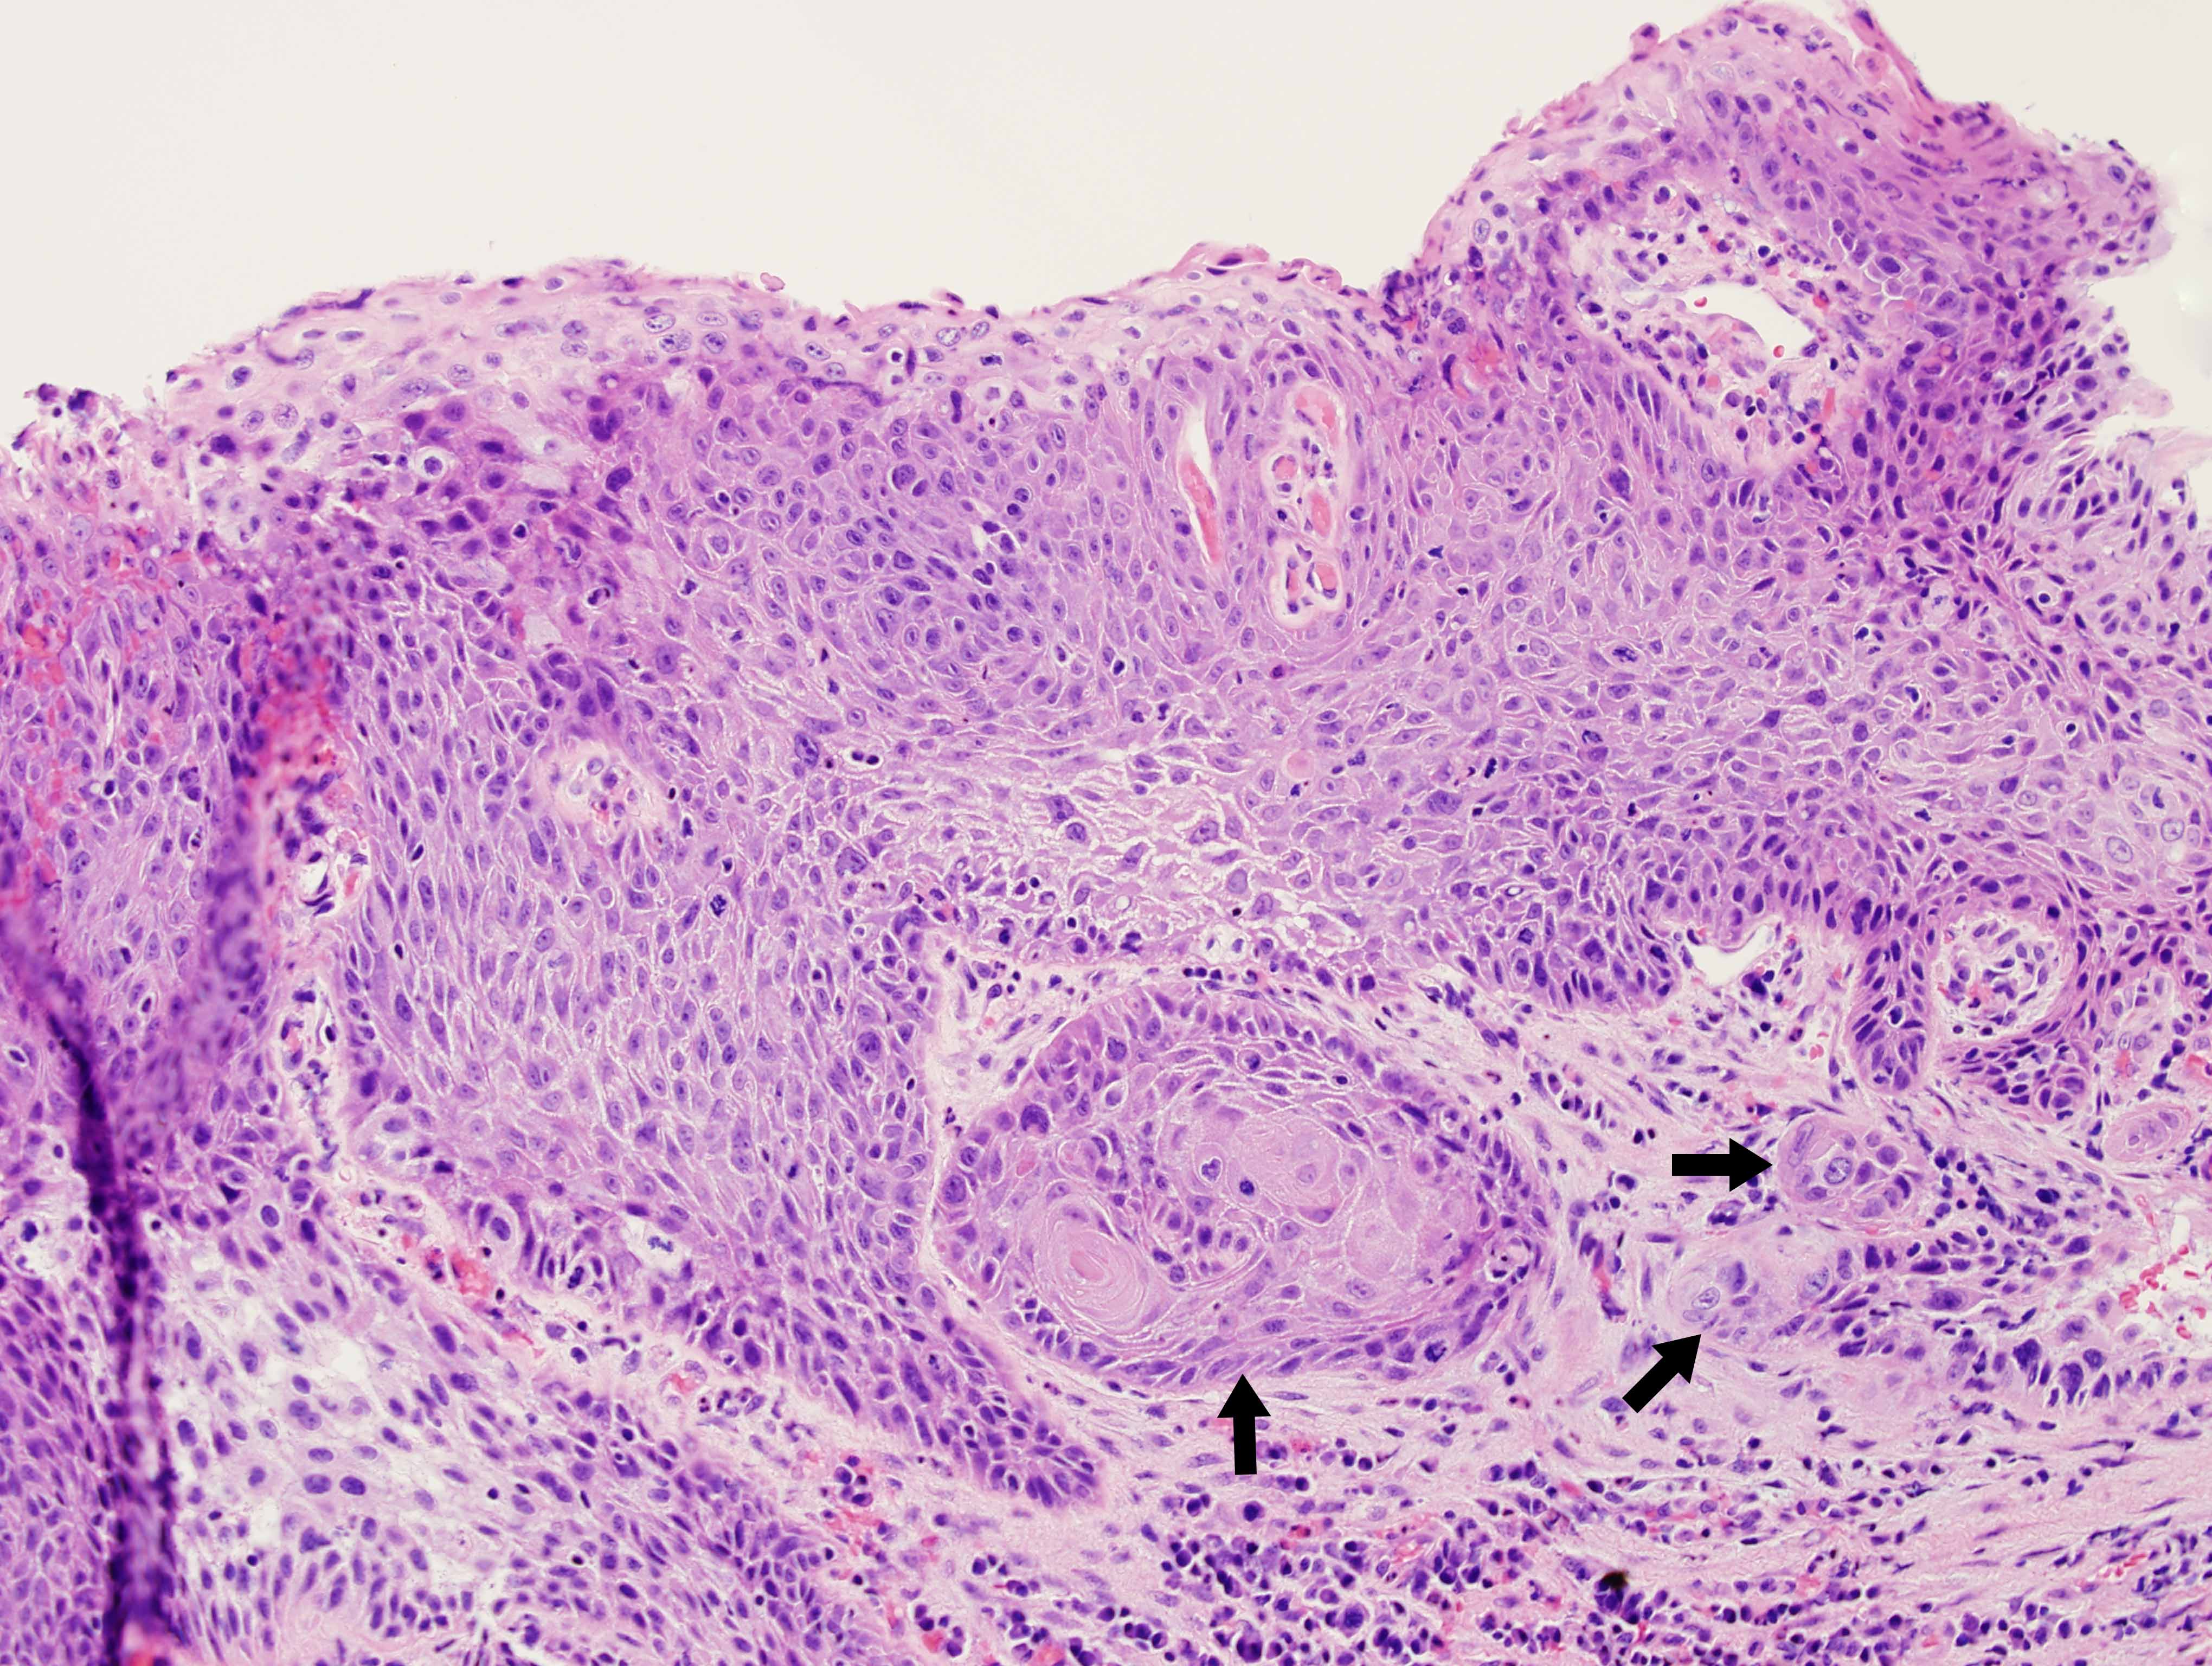 Invasive Squamous Cell Carcinoma Initially Presenting As Laryngeal Leukoplakia Iowa Head And